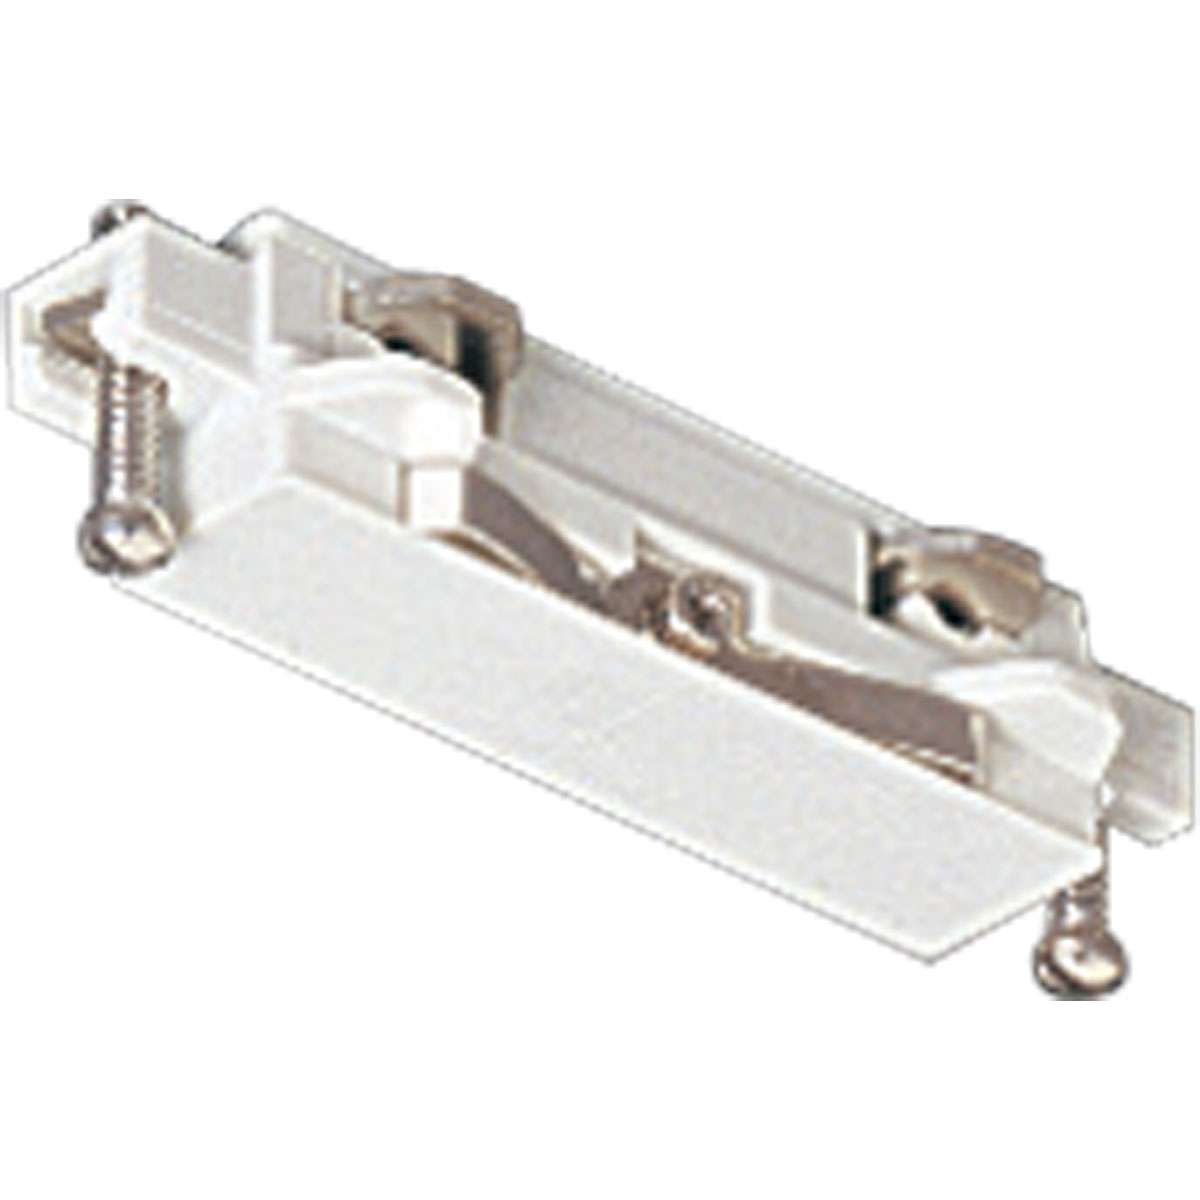 Straight connector for joining two or more track sections. The connectors plug into track sections only one way to ensure positive polarization. White finish.